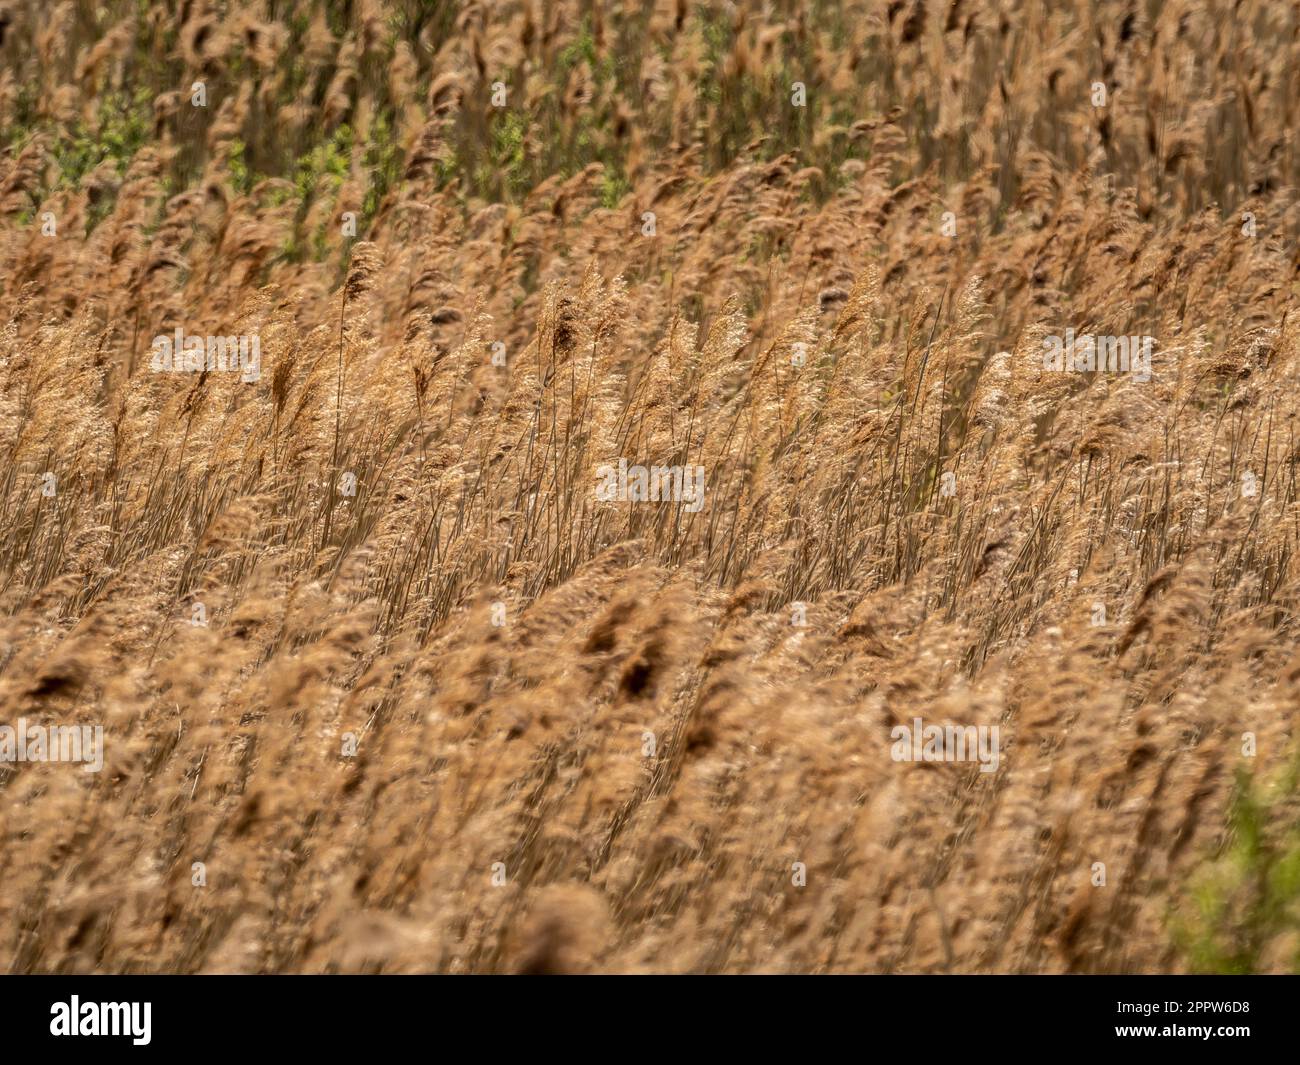 Golden seed heads being gently blown by the wind in the reedbeds at St Aidan's park nature reserve. UK. Stock Photo